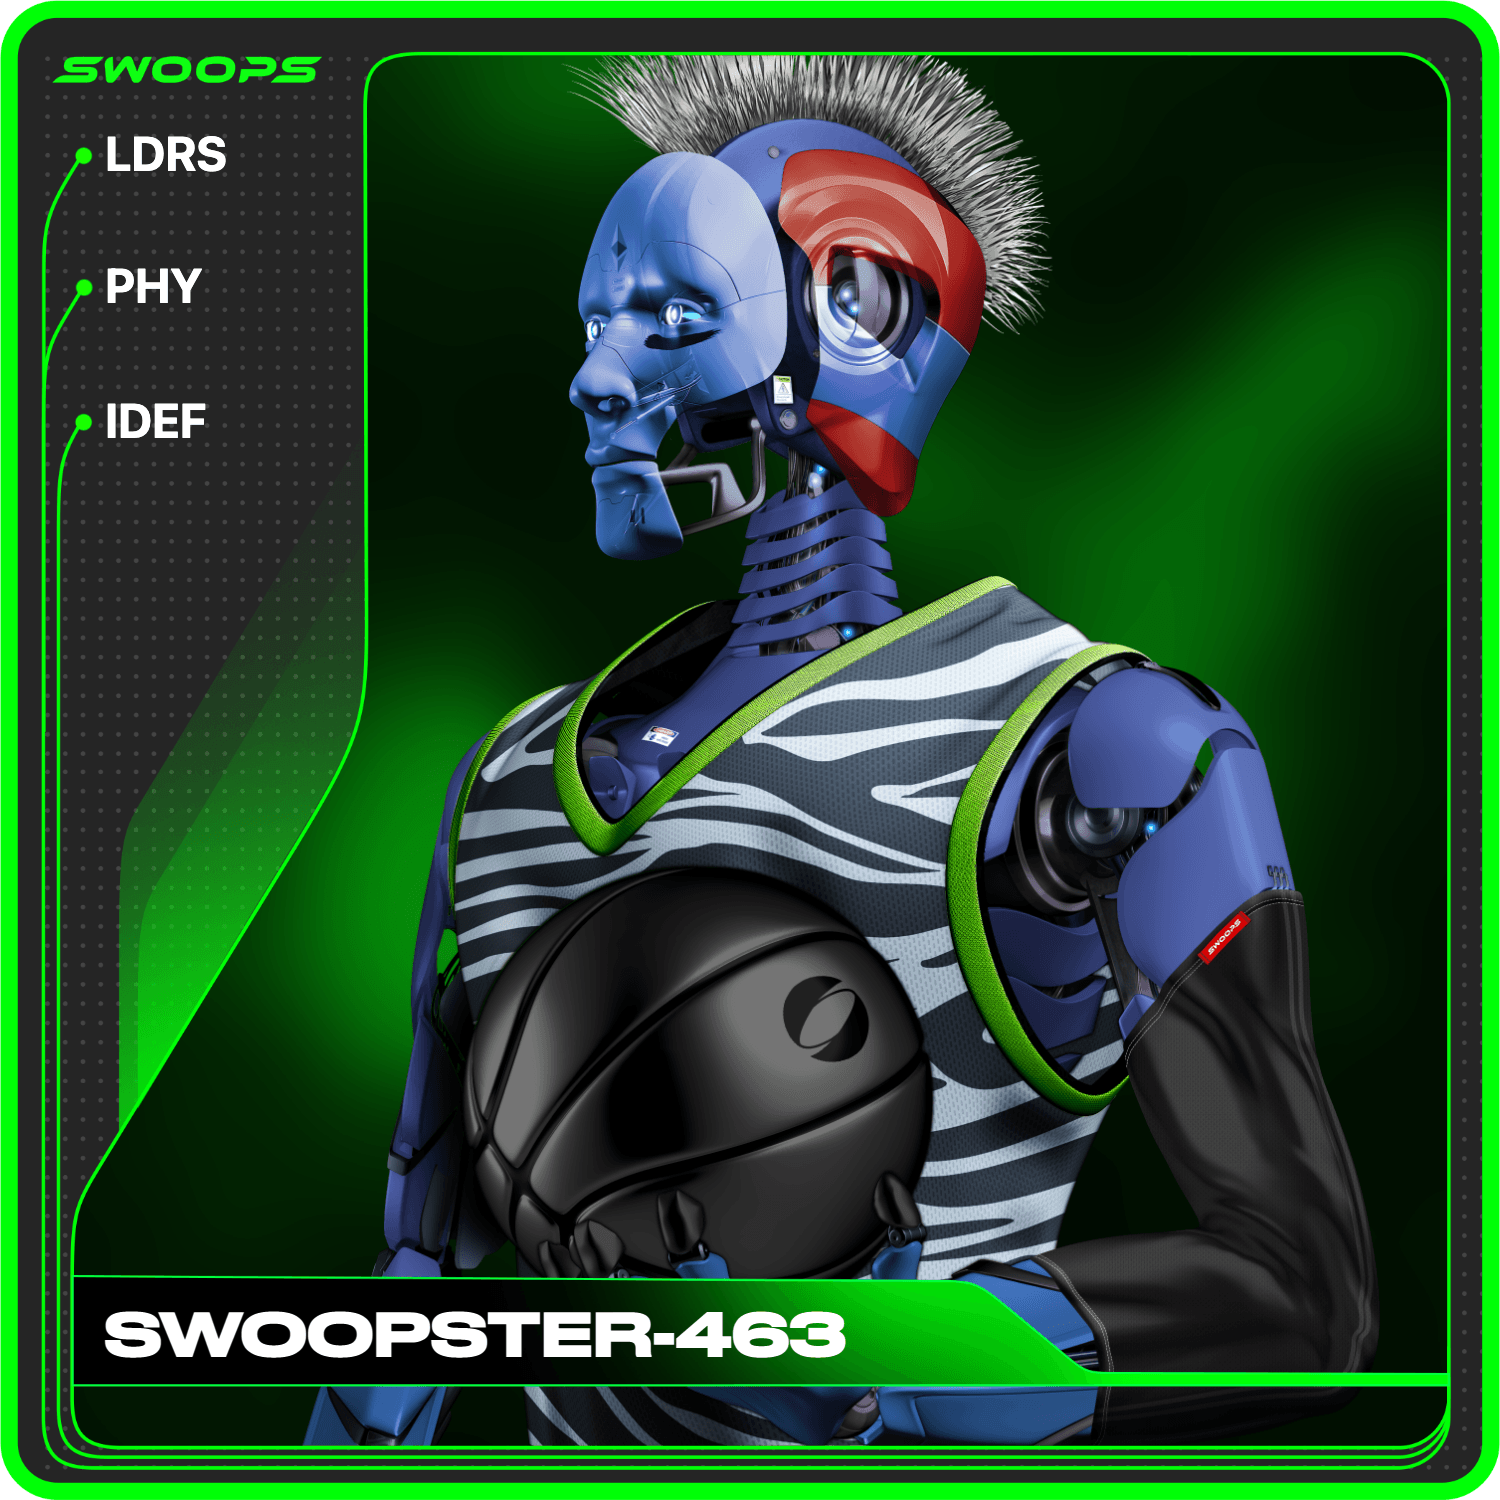 SWOOPSTER-463